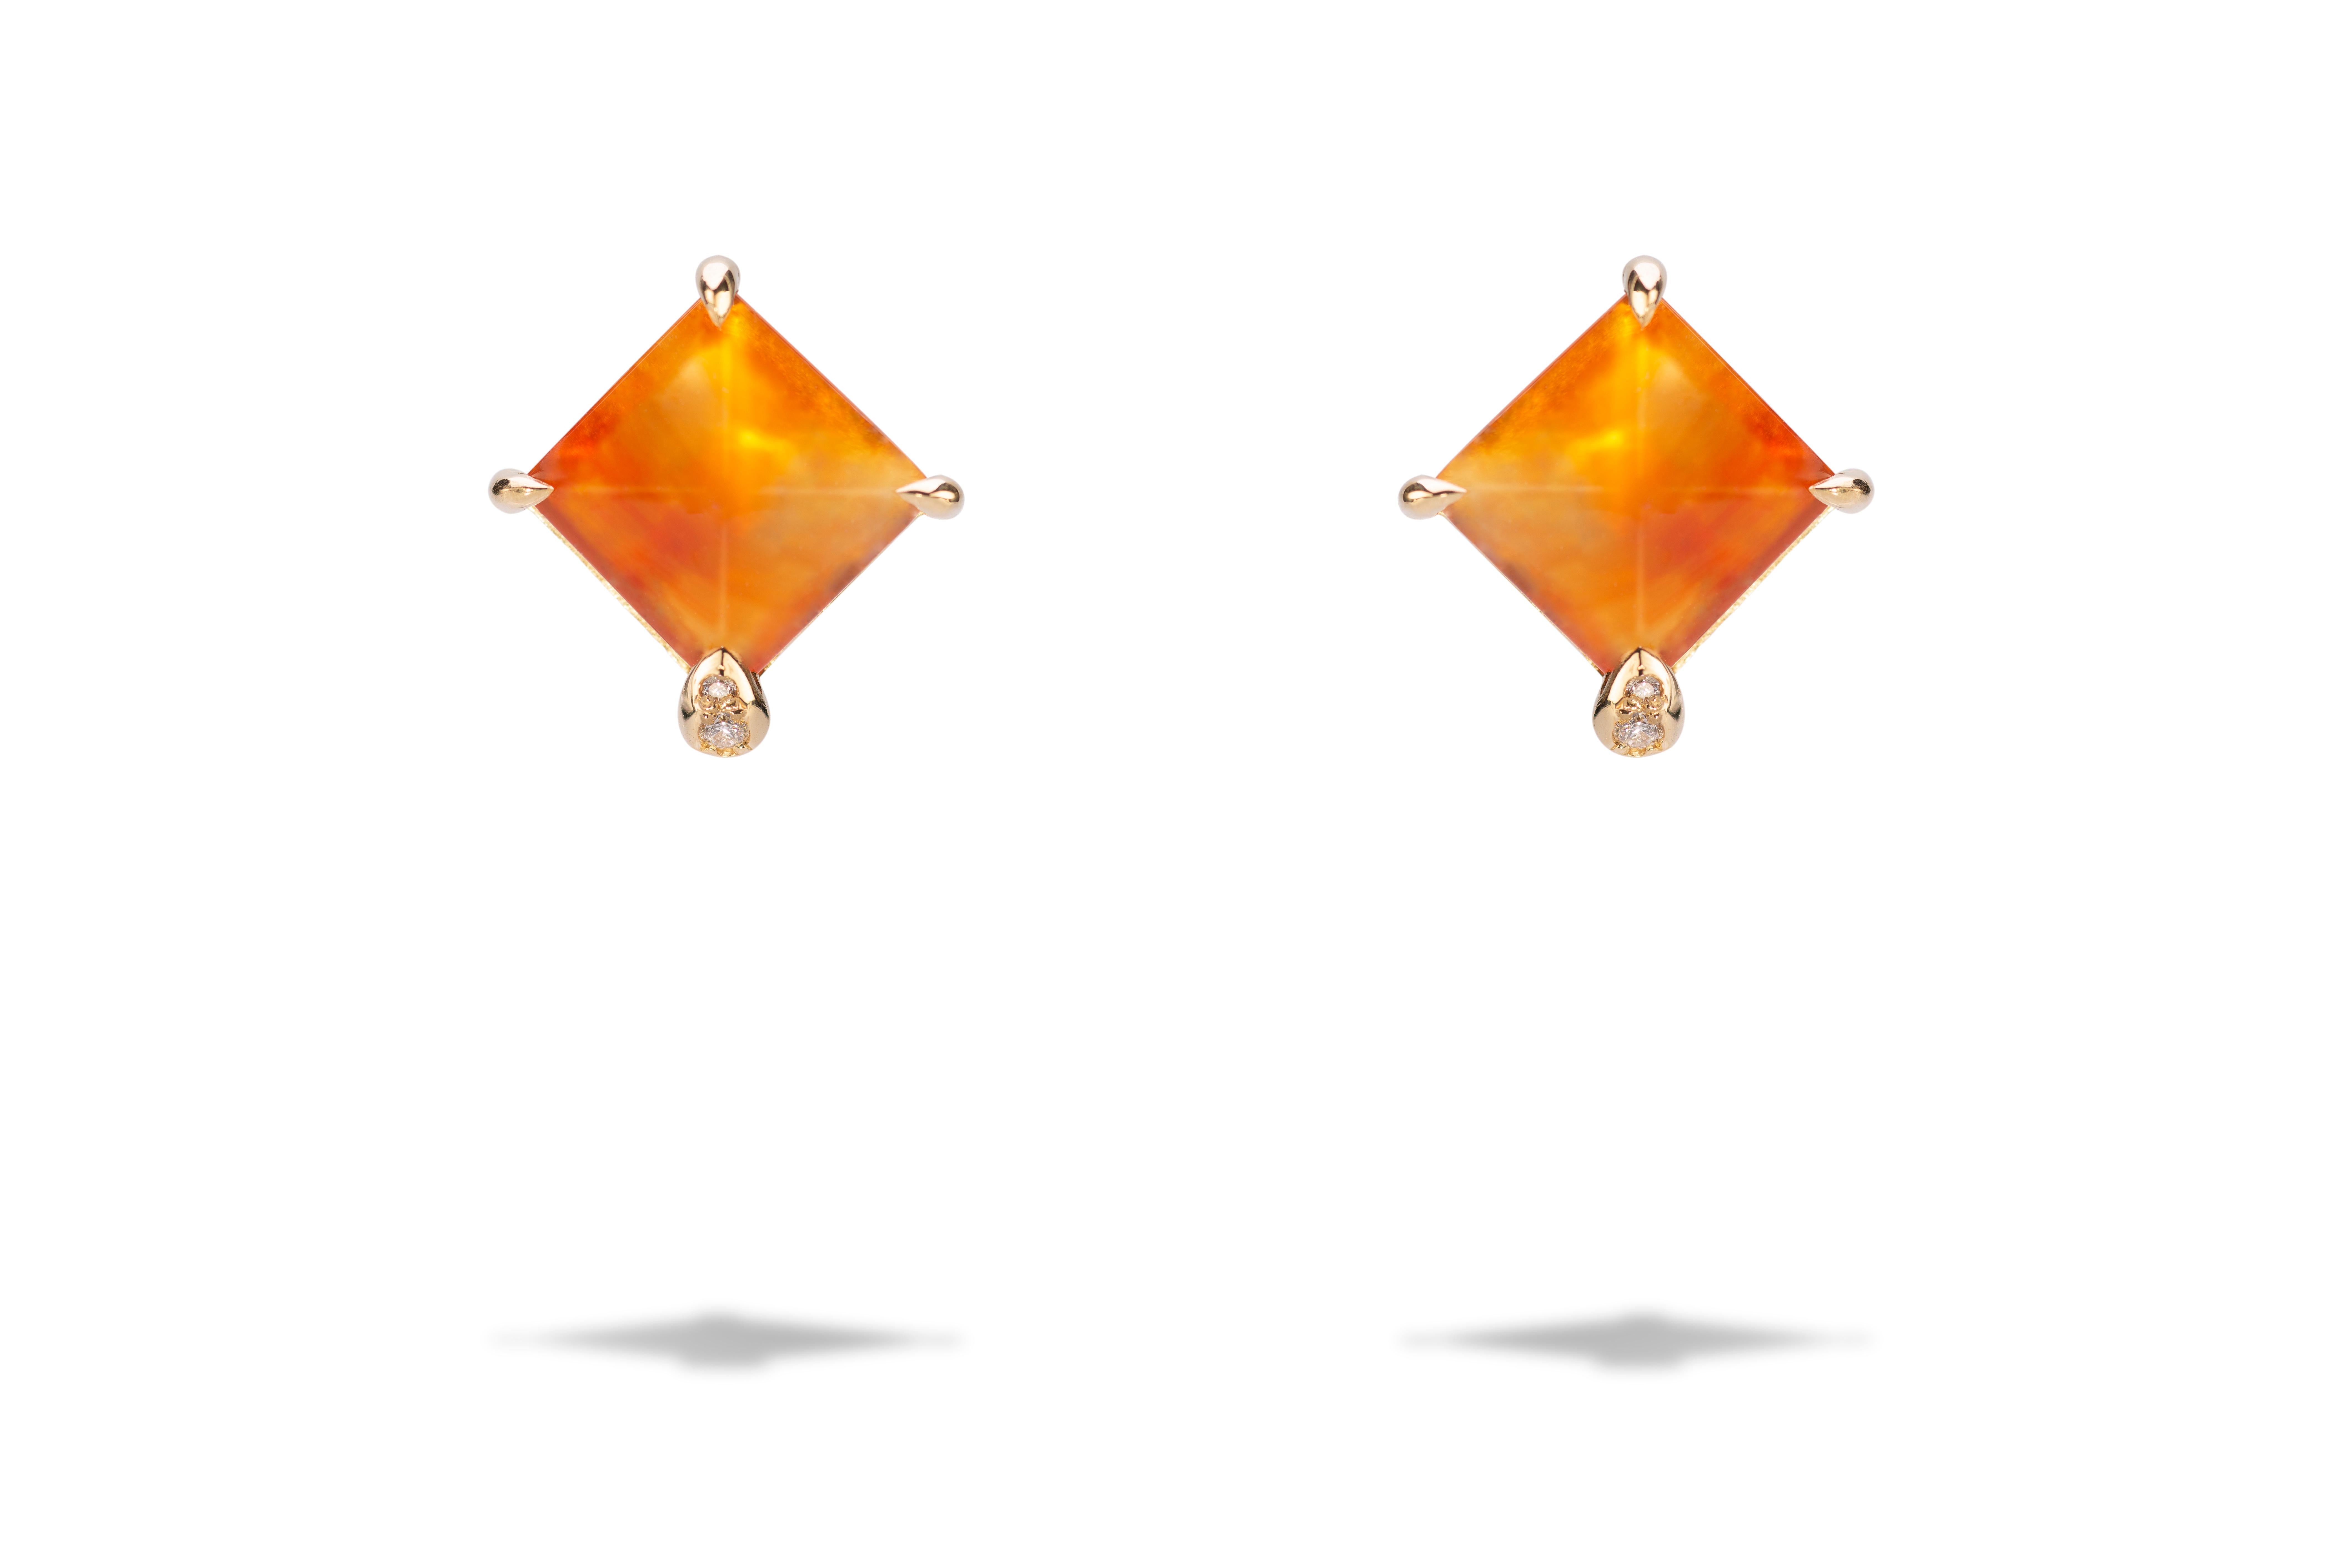 Rossella Ugolini Design Collection Earrings in 18K Yellow Gold with 0.03 White Diamonds in the shape of sugarloaf and carnelian. Gorgeous carnelian stud earrings handmade in Italy.
size 1cm x 1cmh. 0.4mm
0.39 inch x 0.39 inch h 0.15 inch
A beautiful